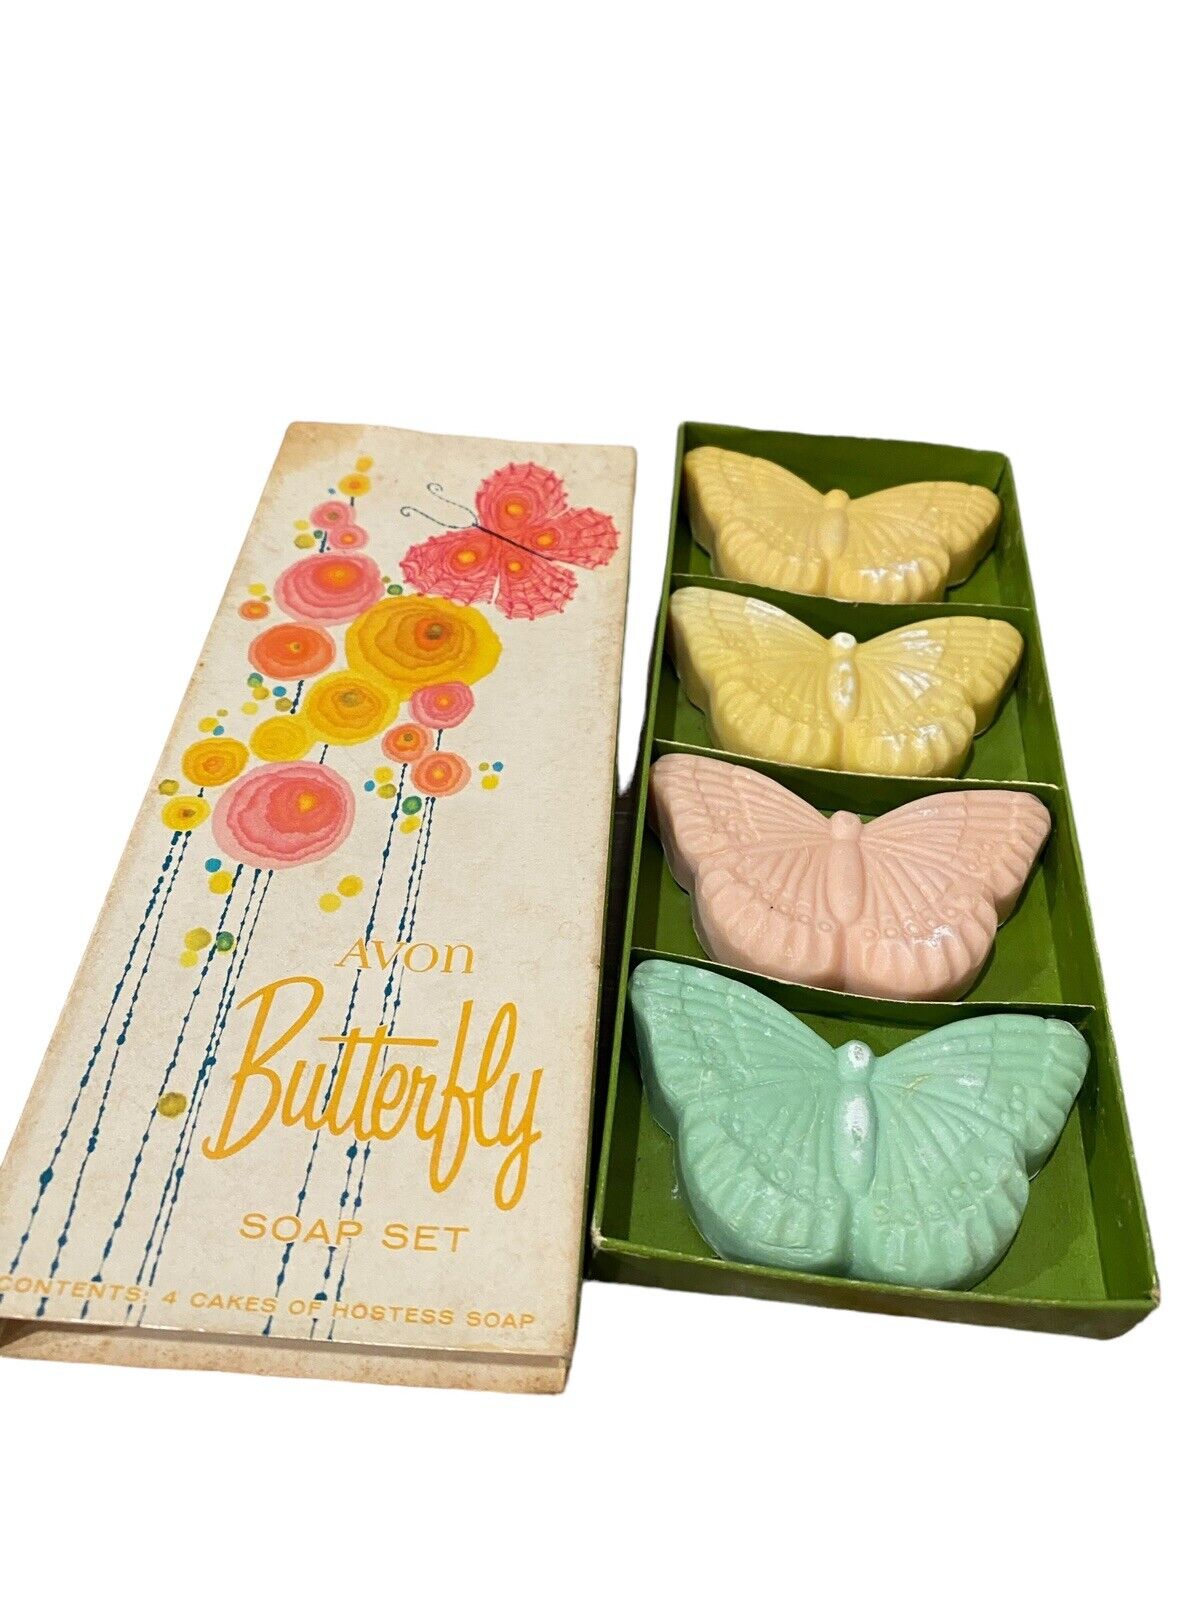 VINTAGE AVON HOSTESS SOAP SET - 4 BUTTERFLY COLORED SOAPS IN PACKAGE Unused